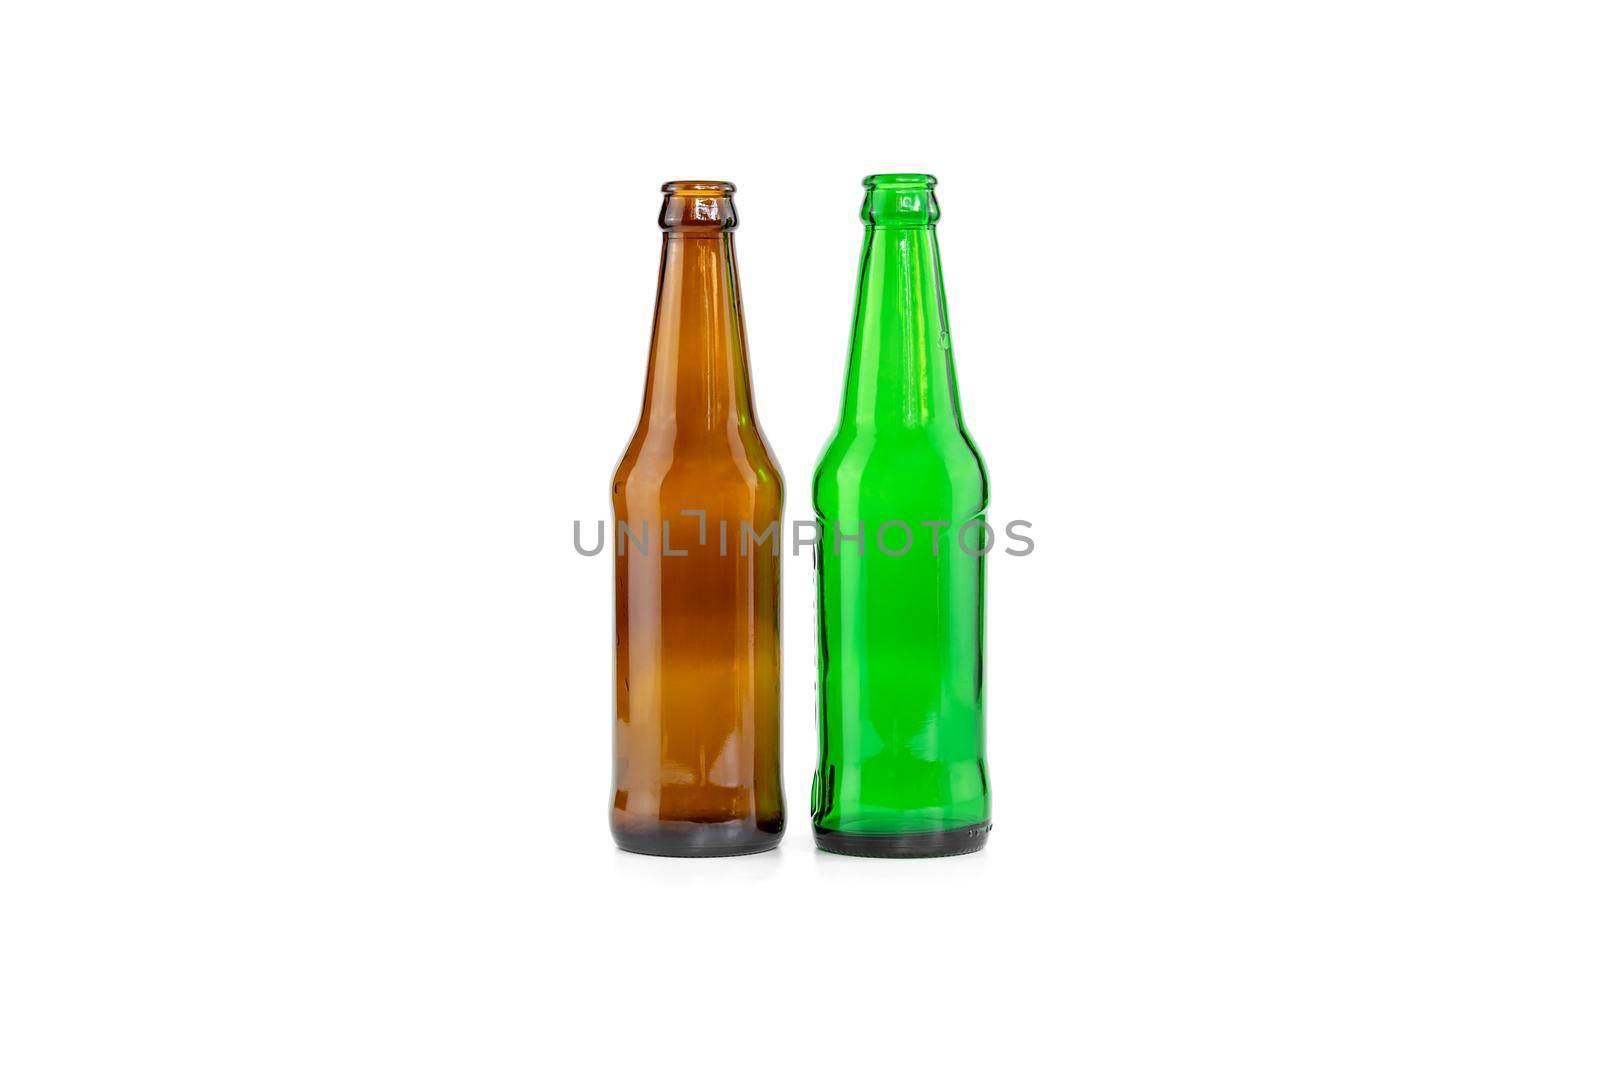 Empty brown and green beers bottles isolated on white background